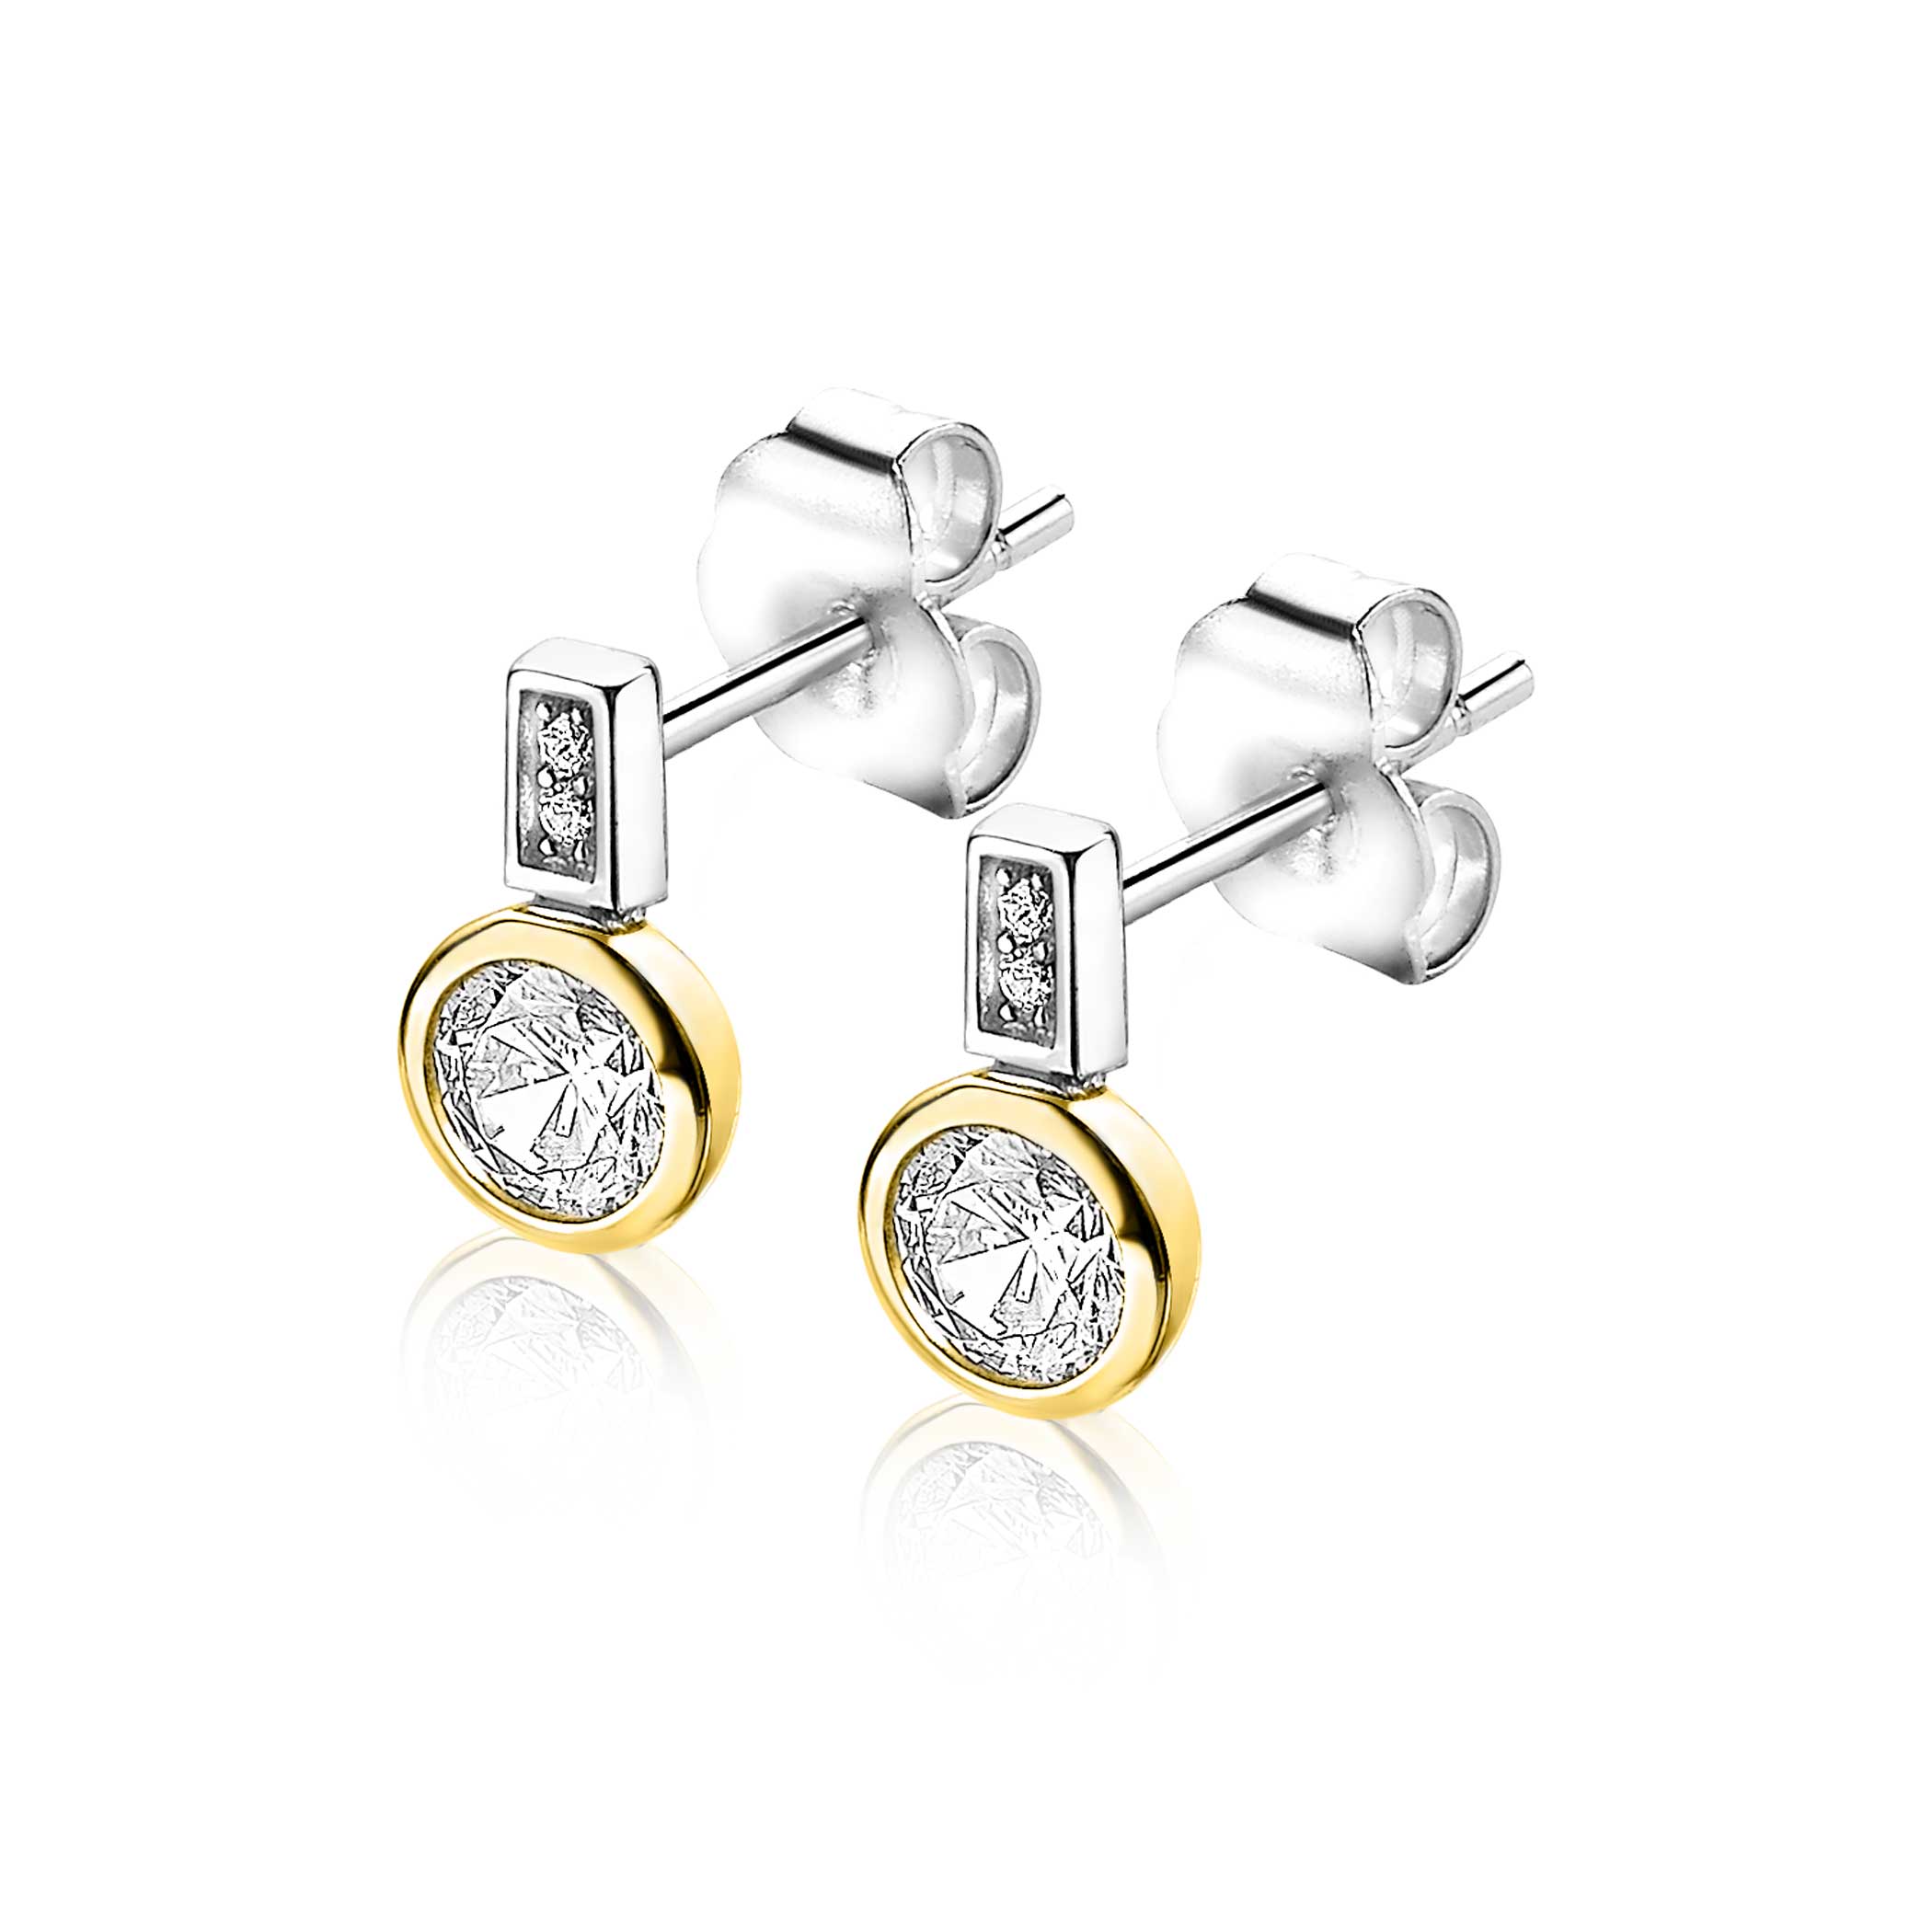 ZINZI Gold Plated Sterling Silver Stud Earrings Round White ZIO1662G